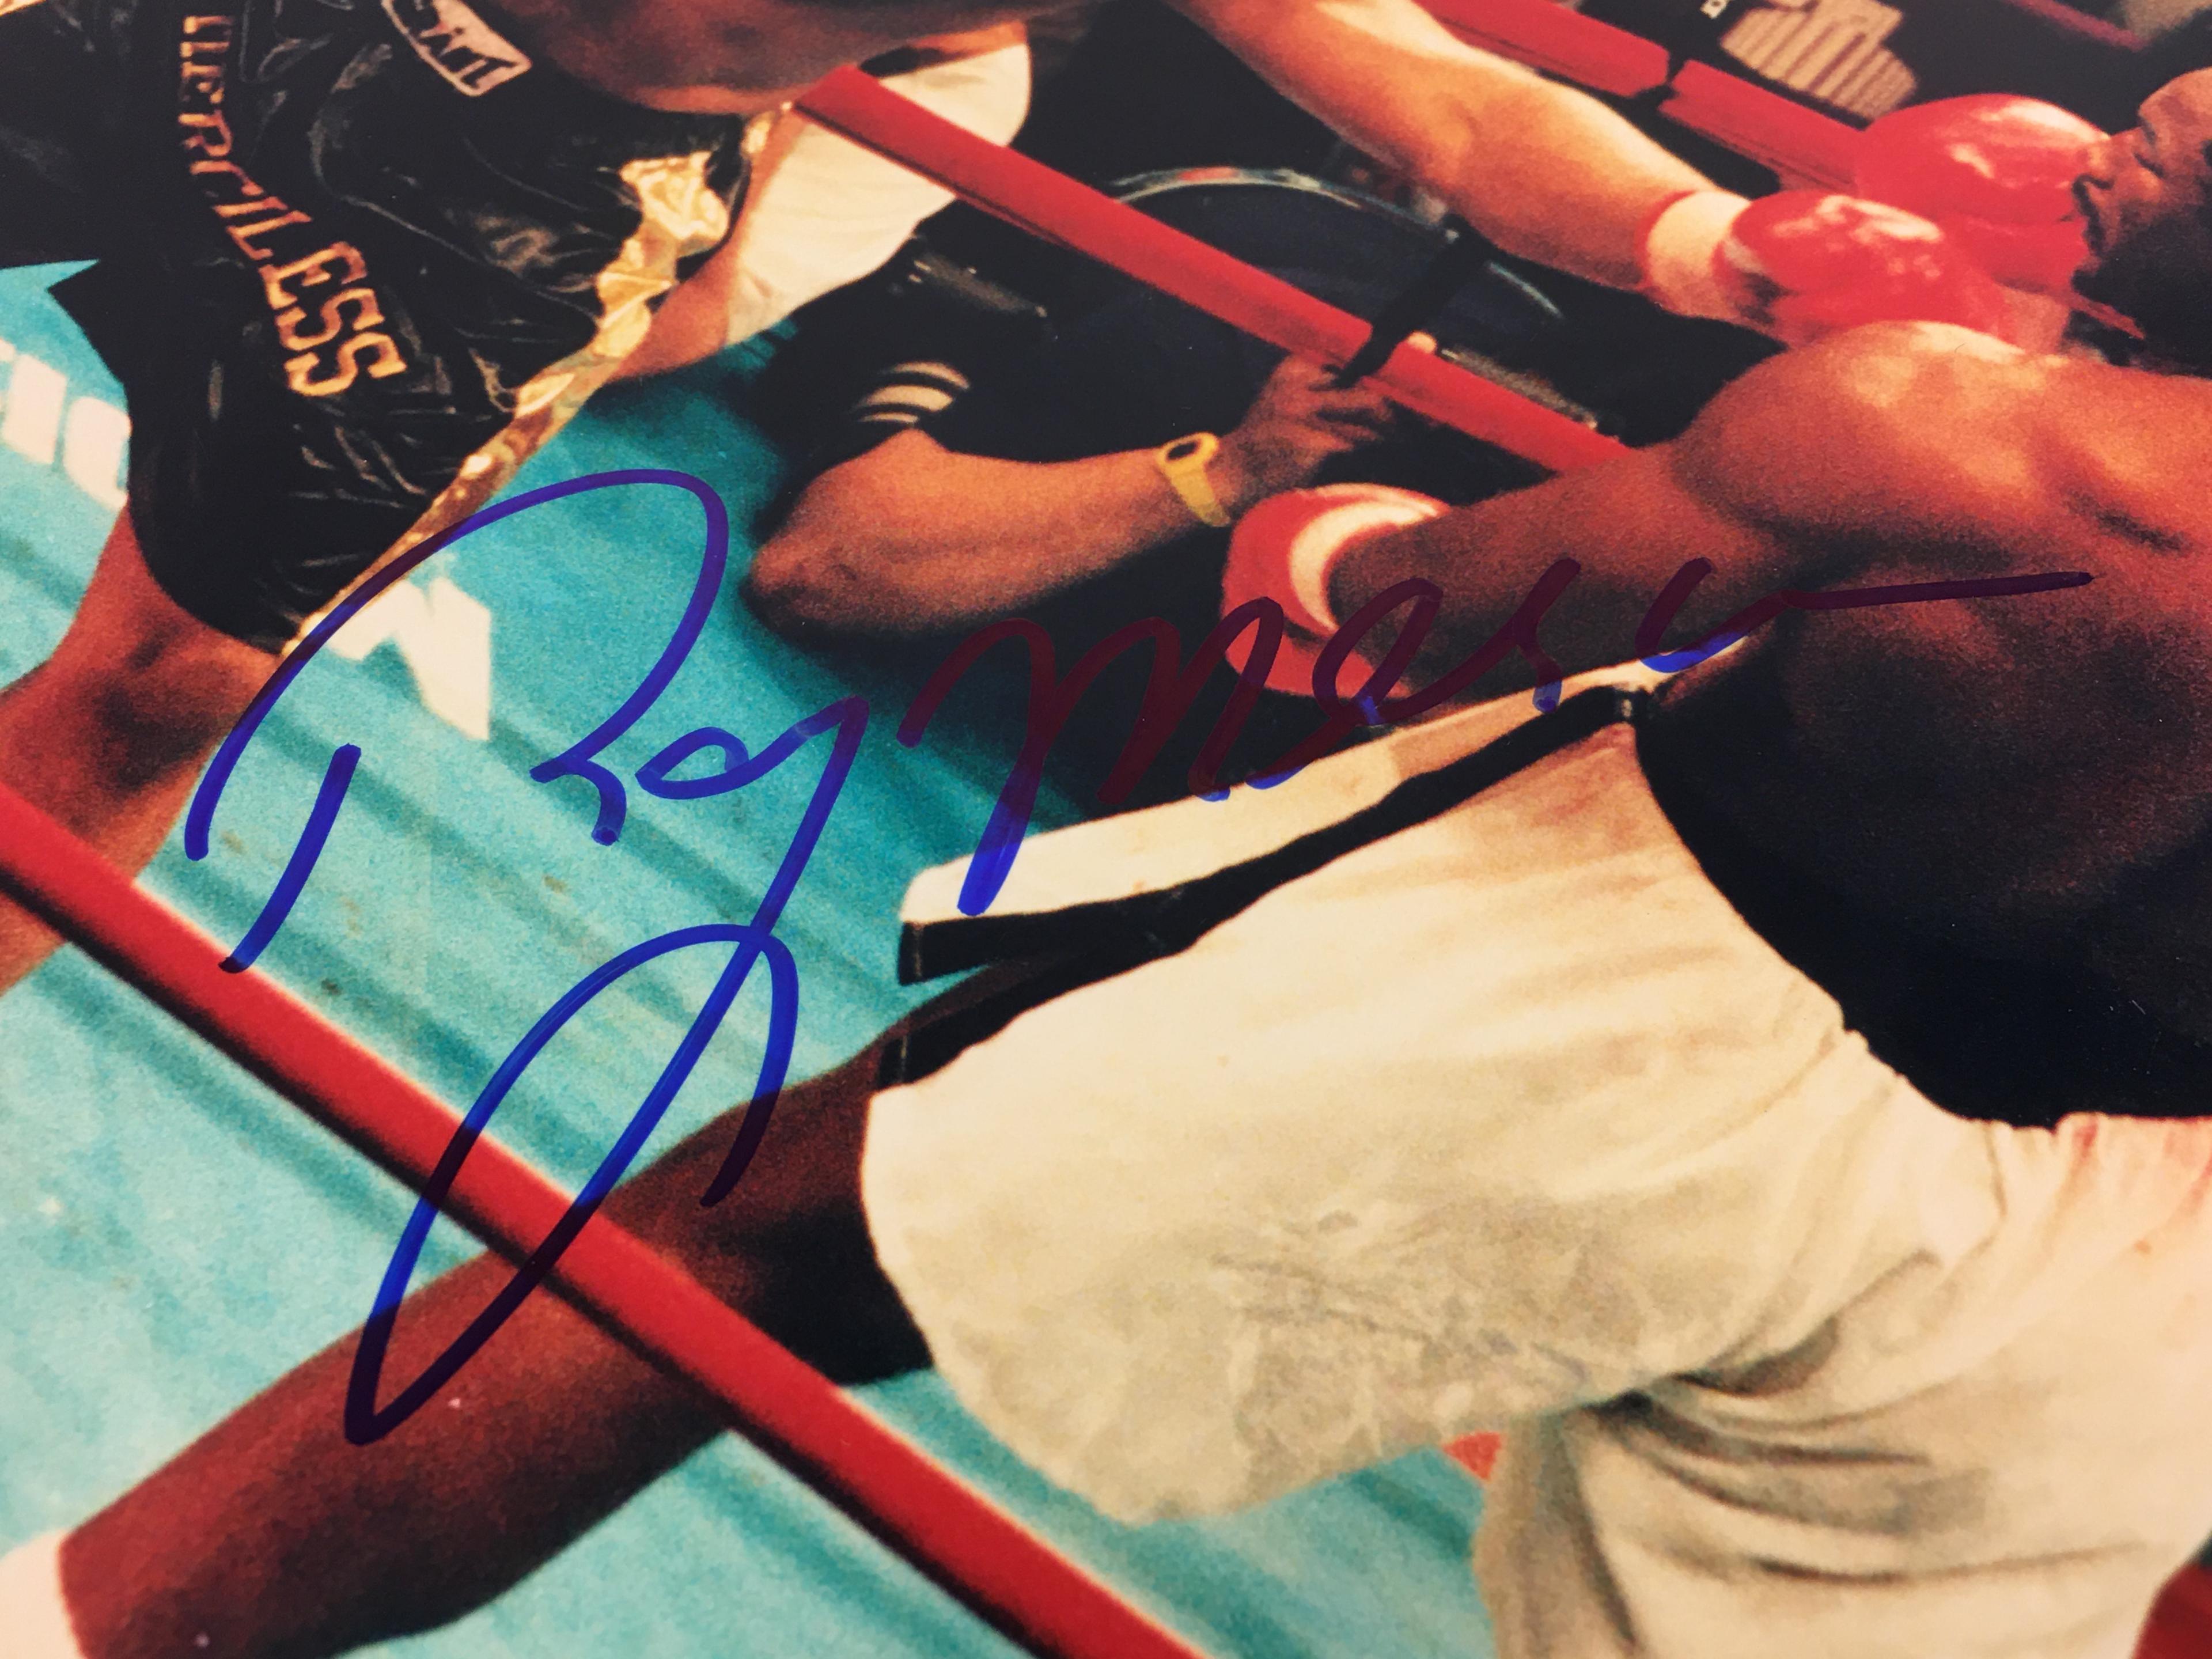 Collector Sport Boxing Photo Autographed by Ray Mercer 8X10" w/ COA